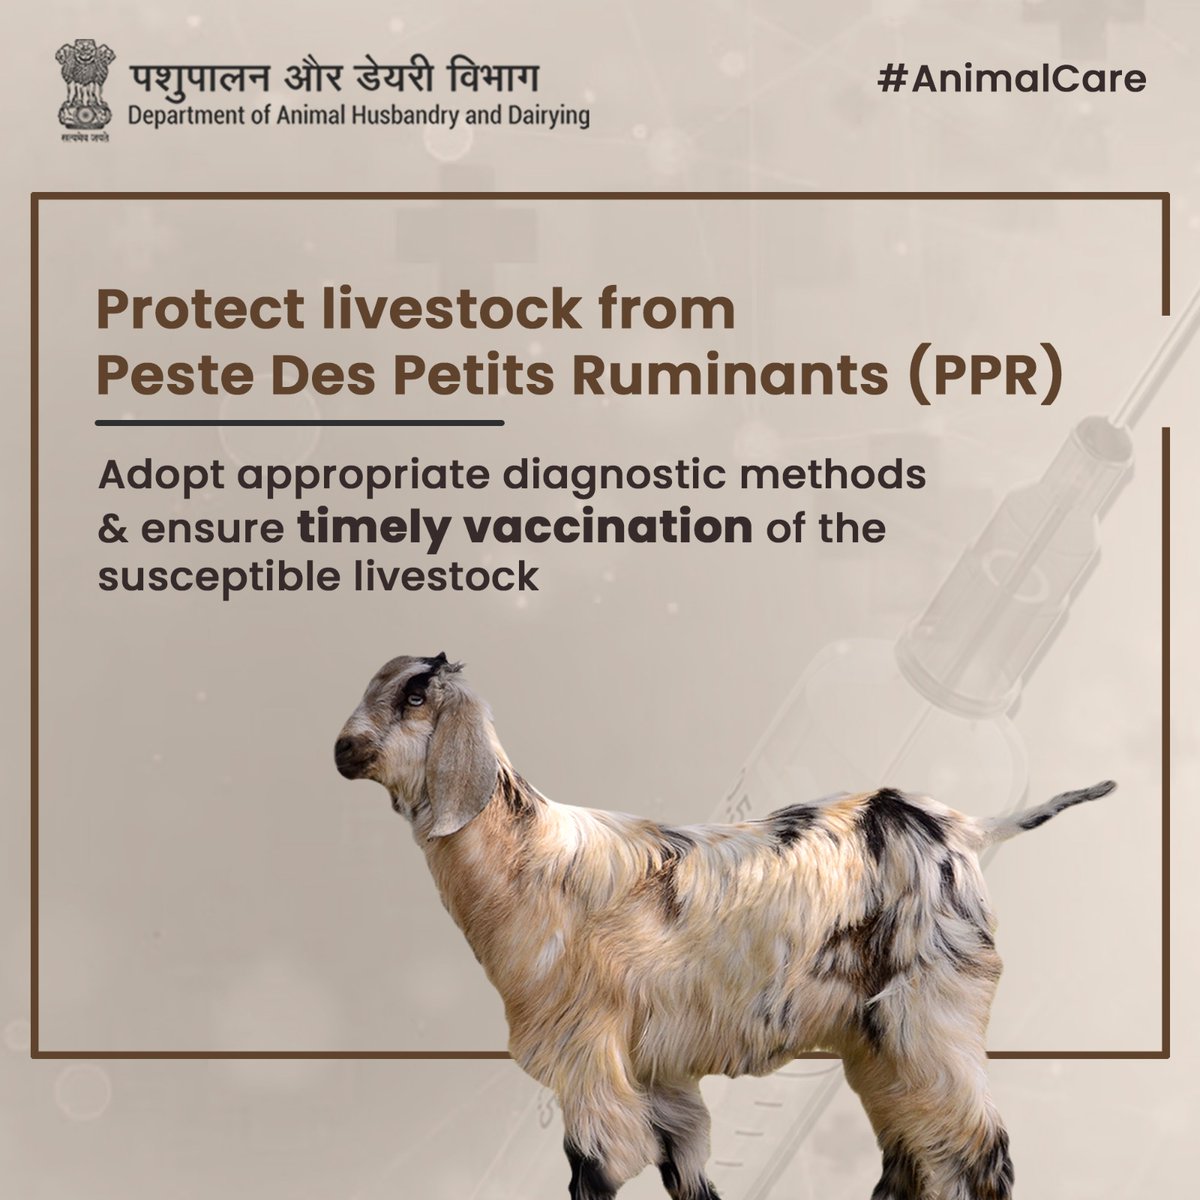 Don't let PPR be a cause of concern for your livestock's health
#diseases #animaldiseases #AatmnirbharBharat #aatmnirbharahd #ahelp #animalhealth #livestock #animalhusbandry #pashupalan